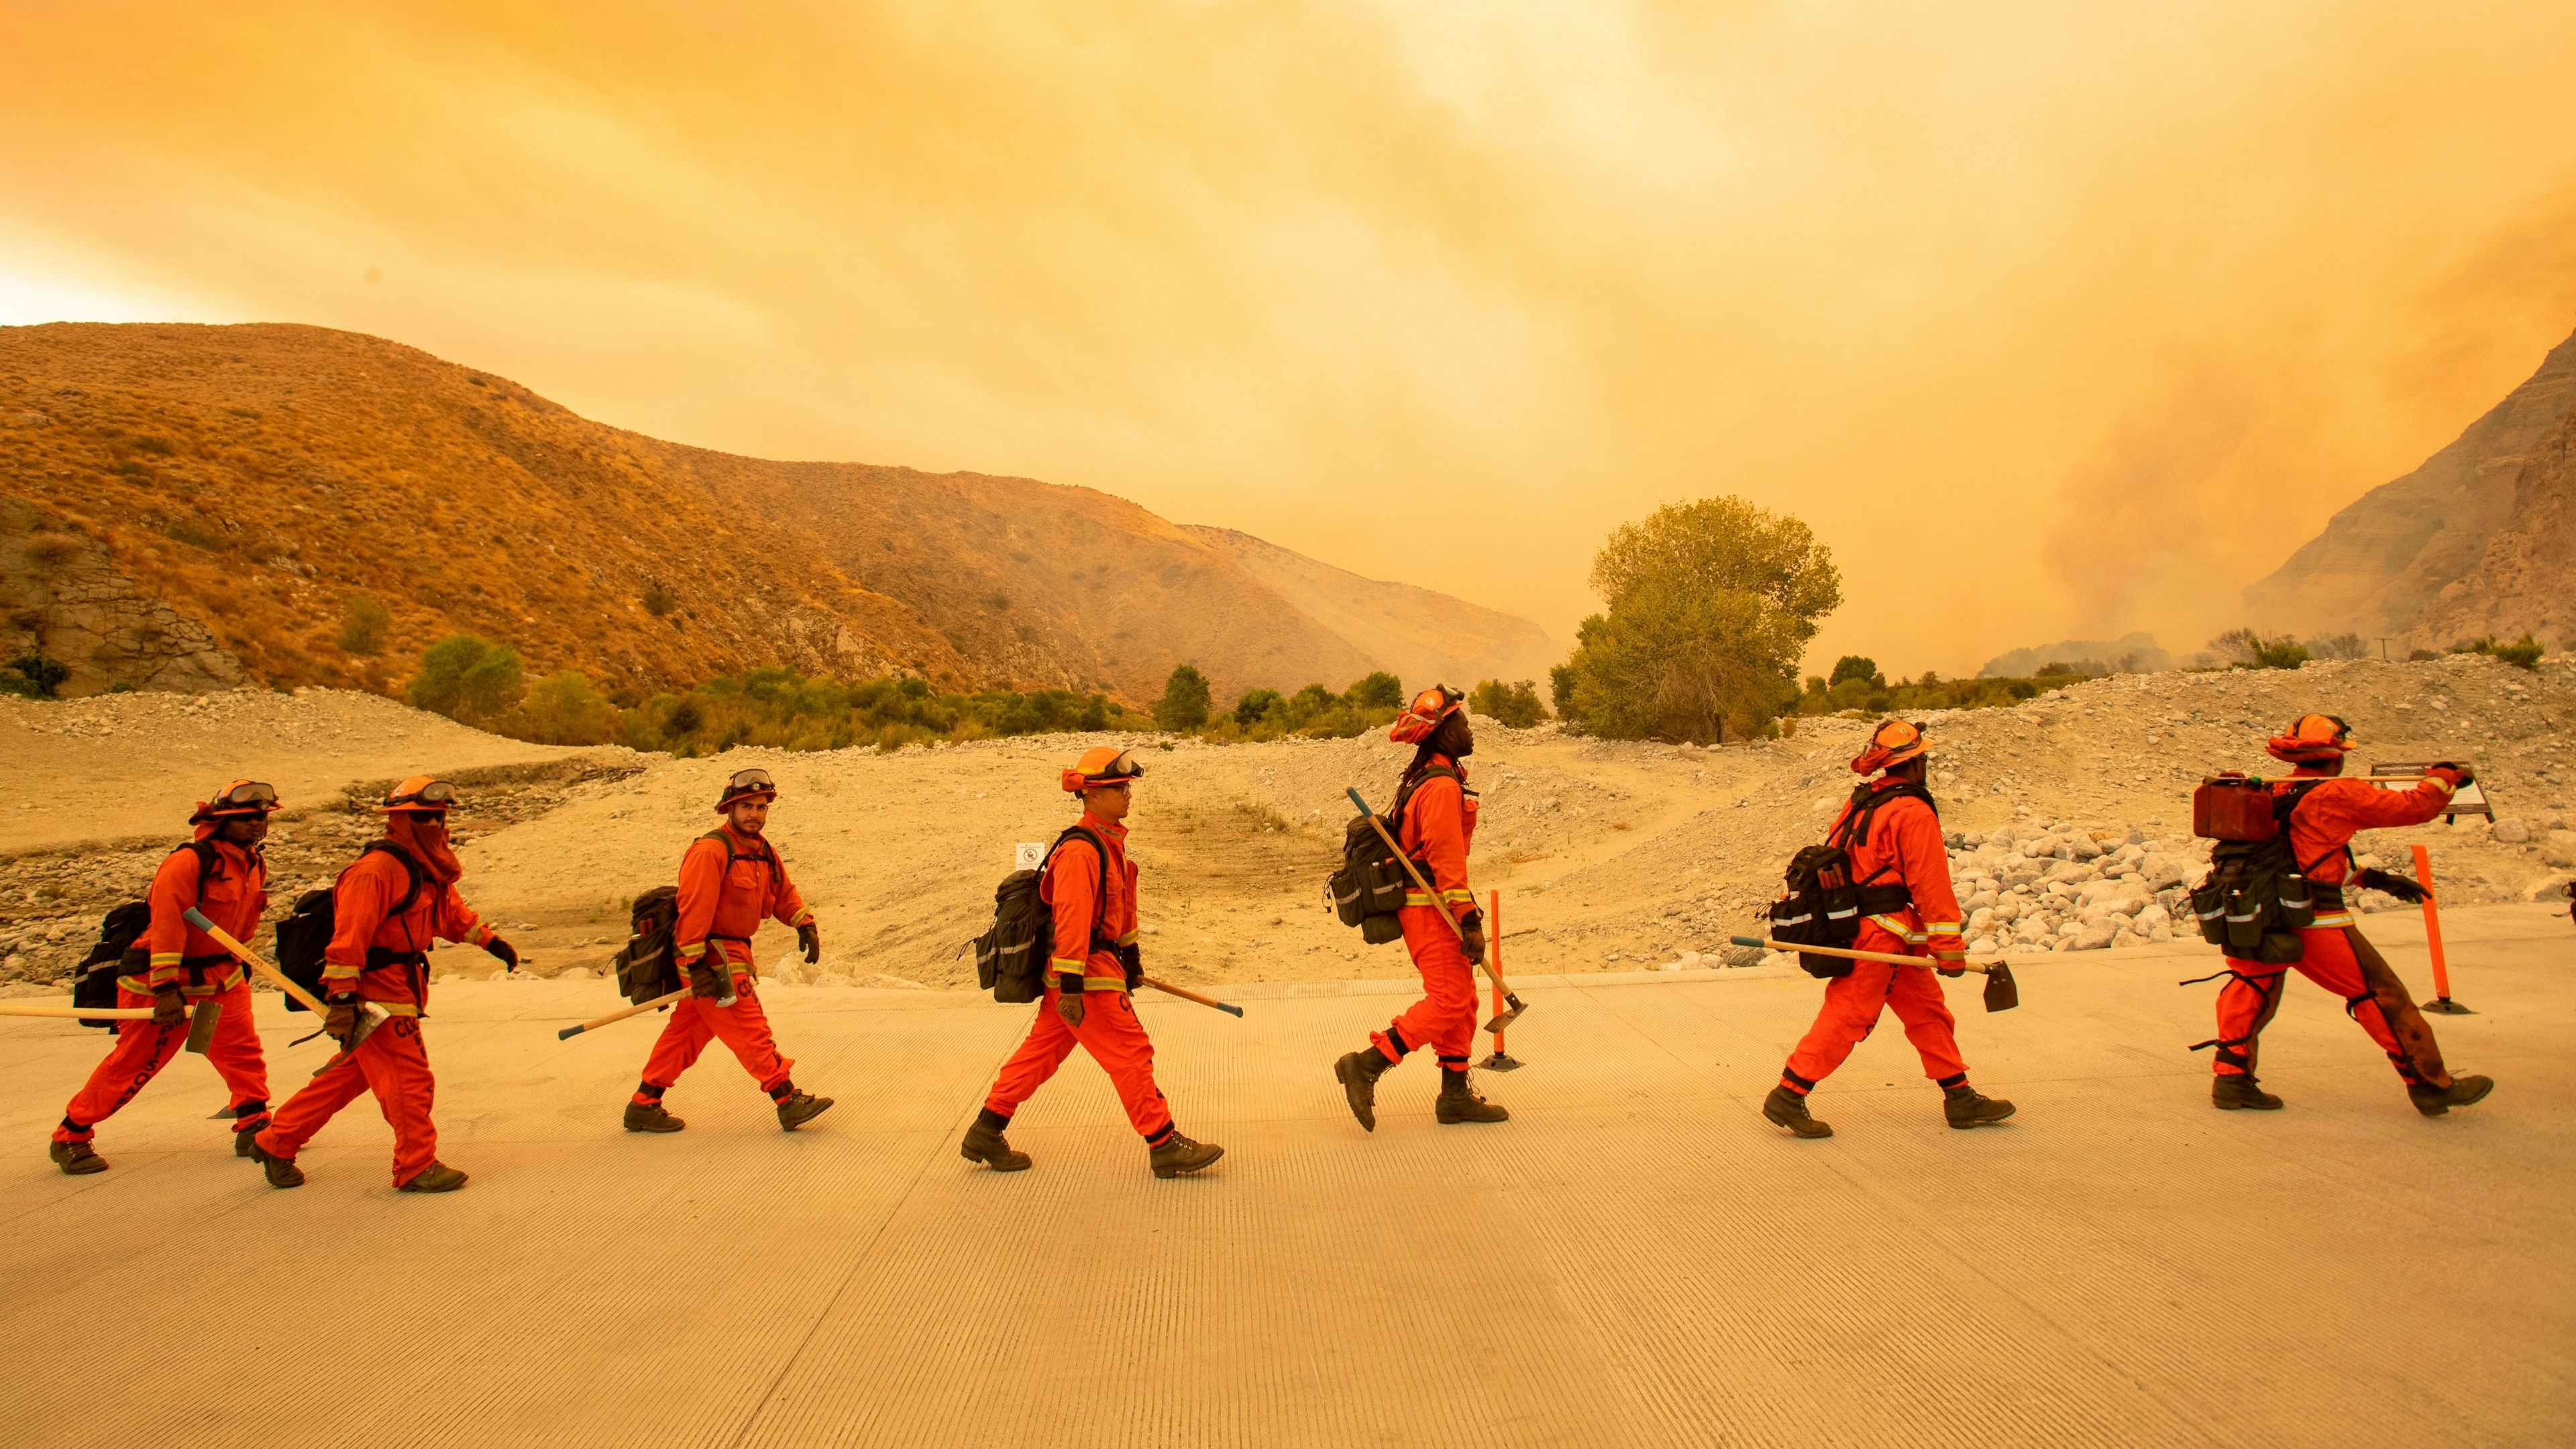 Inmate firefighters arrive at the scene of the Water fire, a new start about 20 miles from the Apple fire in Whitewater, California on August 2, 2020